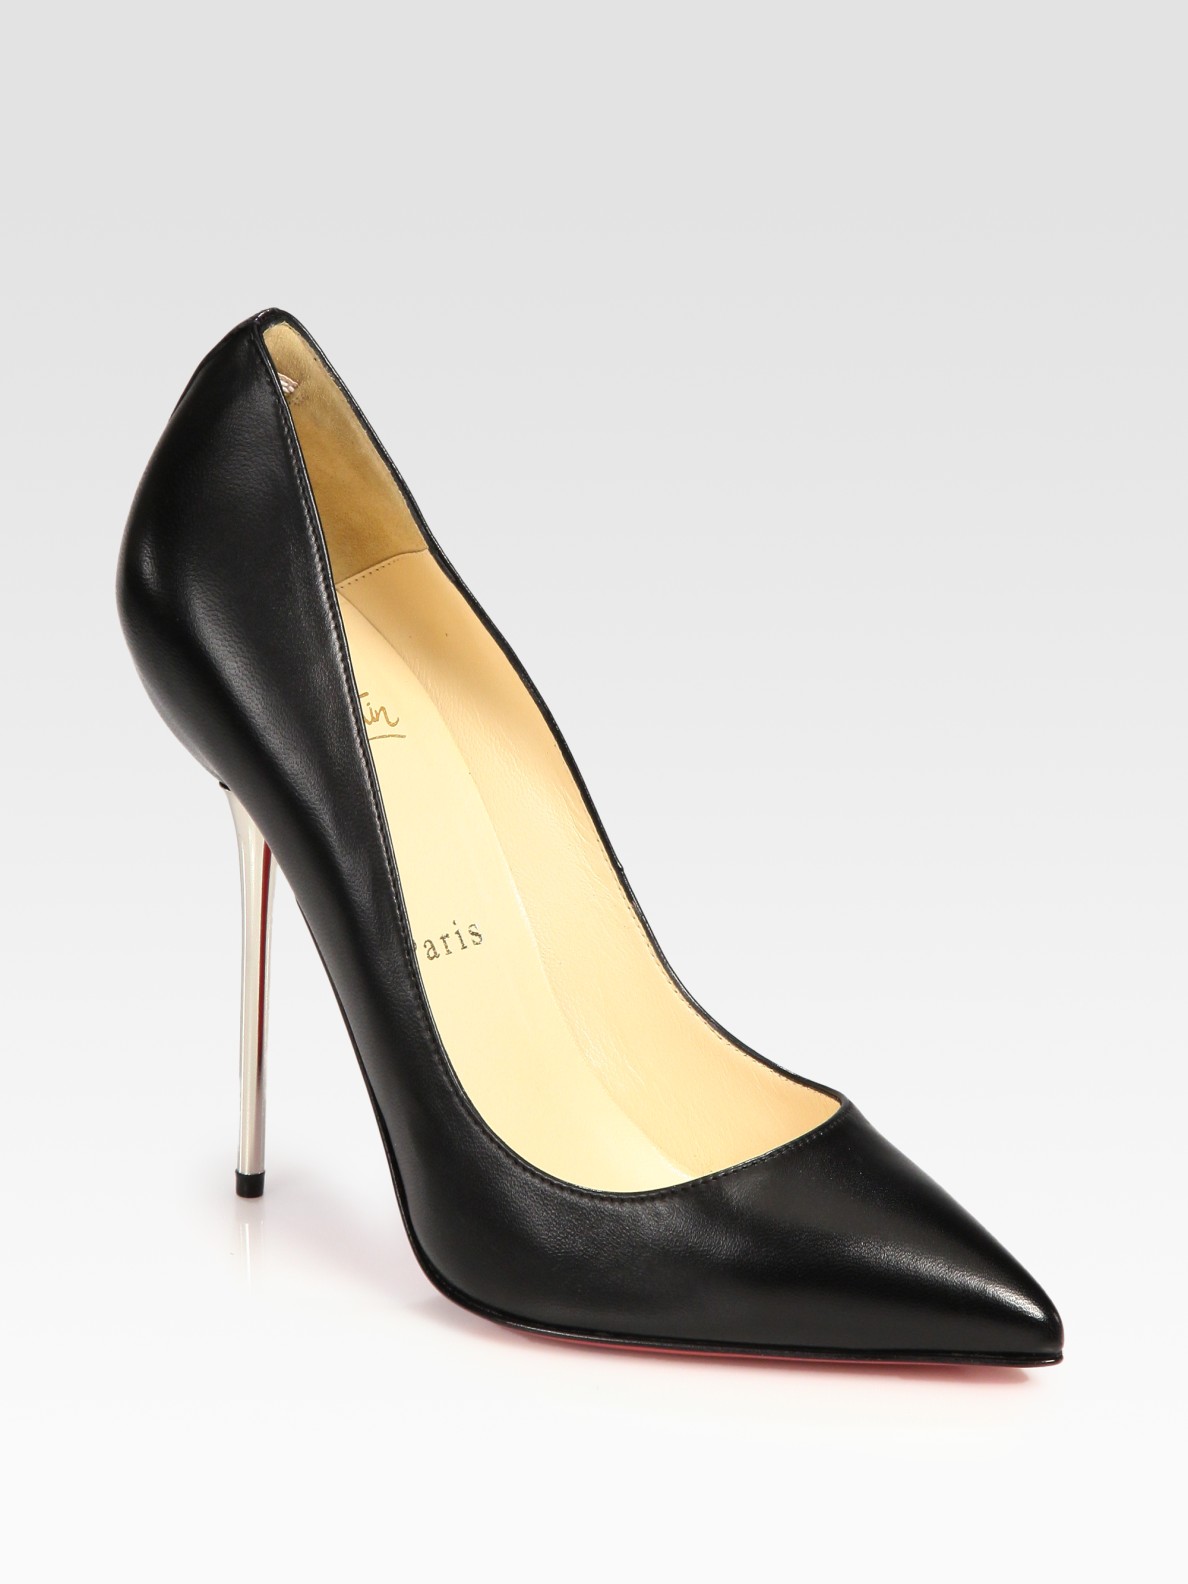 christian louboutin pointed-toe pumps Chocolate brown leather ...